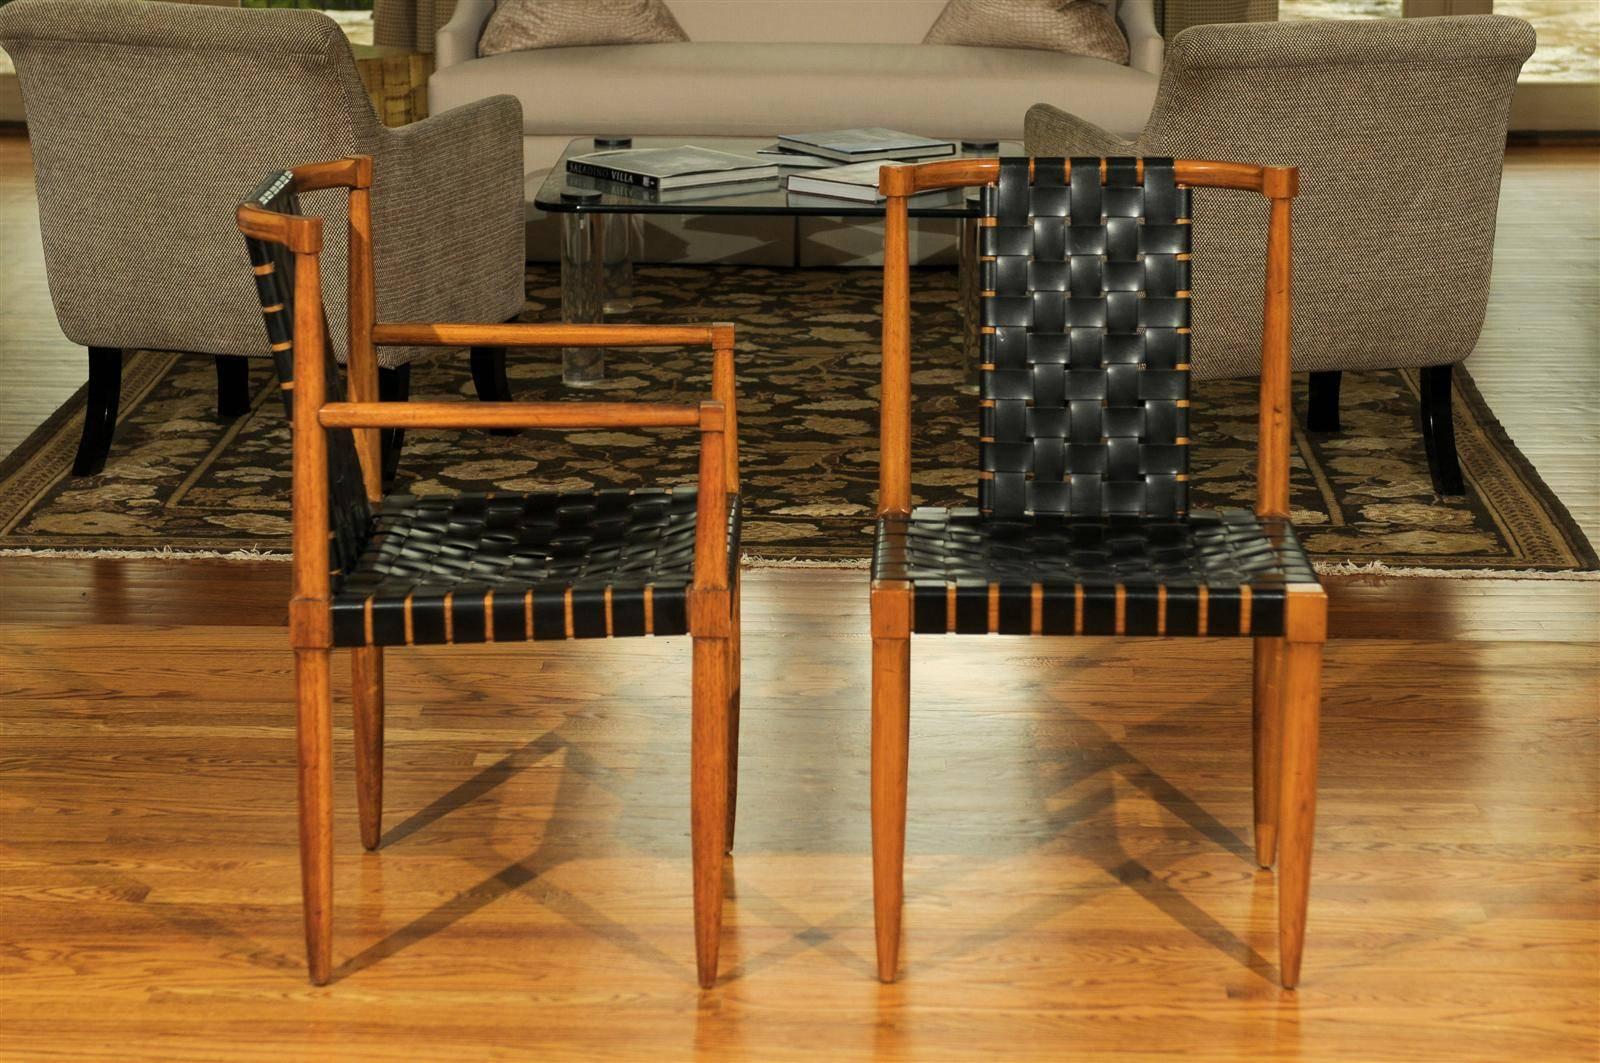 Miraculous Rare Set of 8 Leather Strap Dining Chairs by Tomlinson, dated 1958 In Excellent Condition For Sale In Atlanta, GA